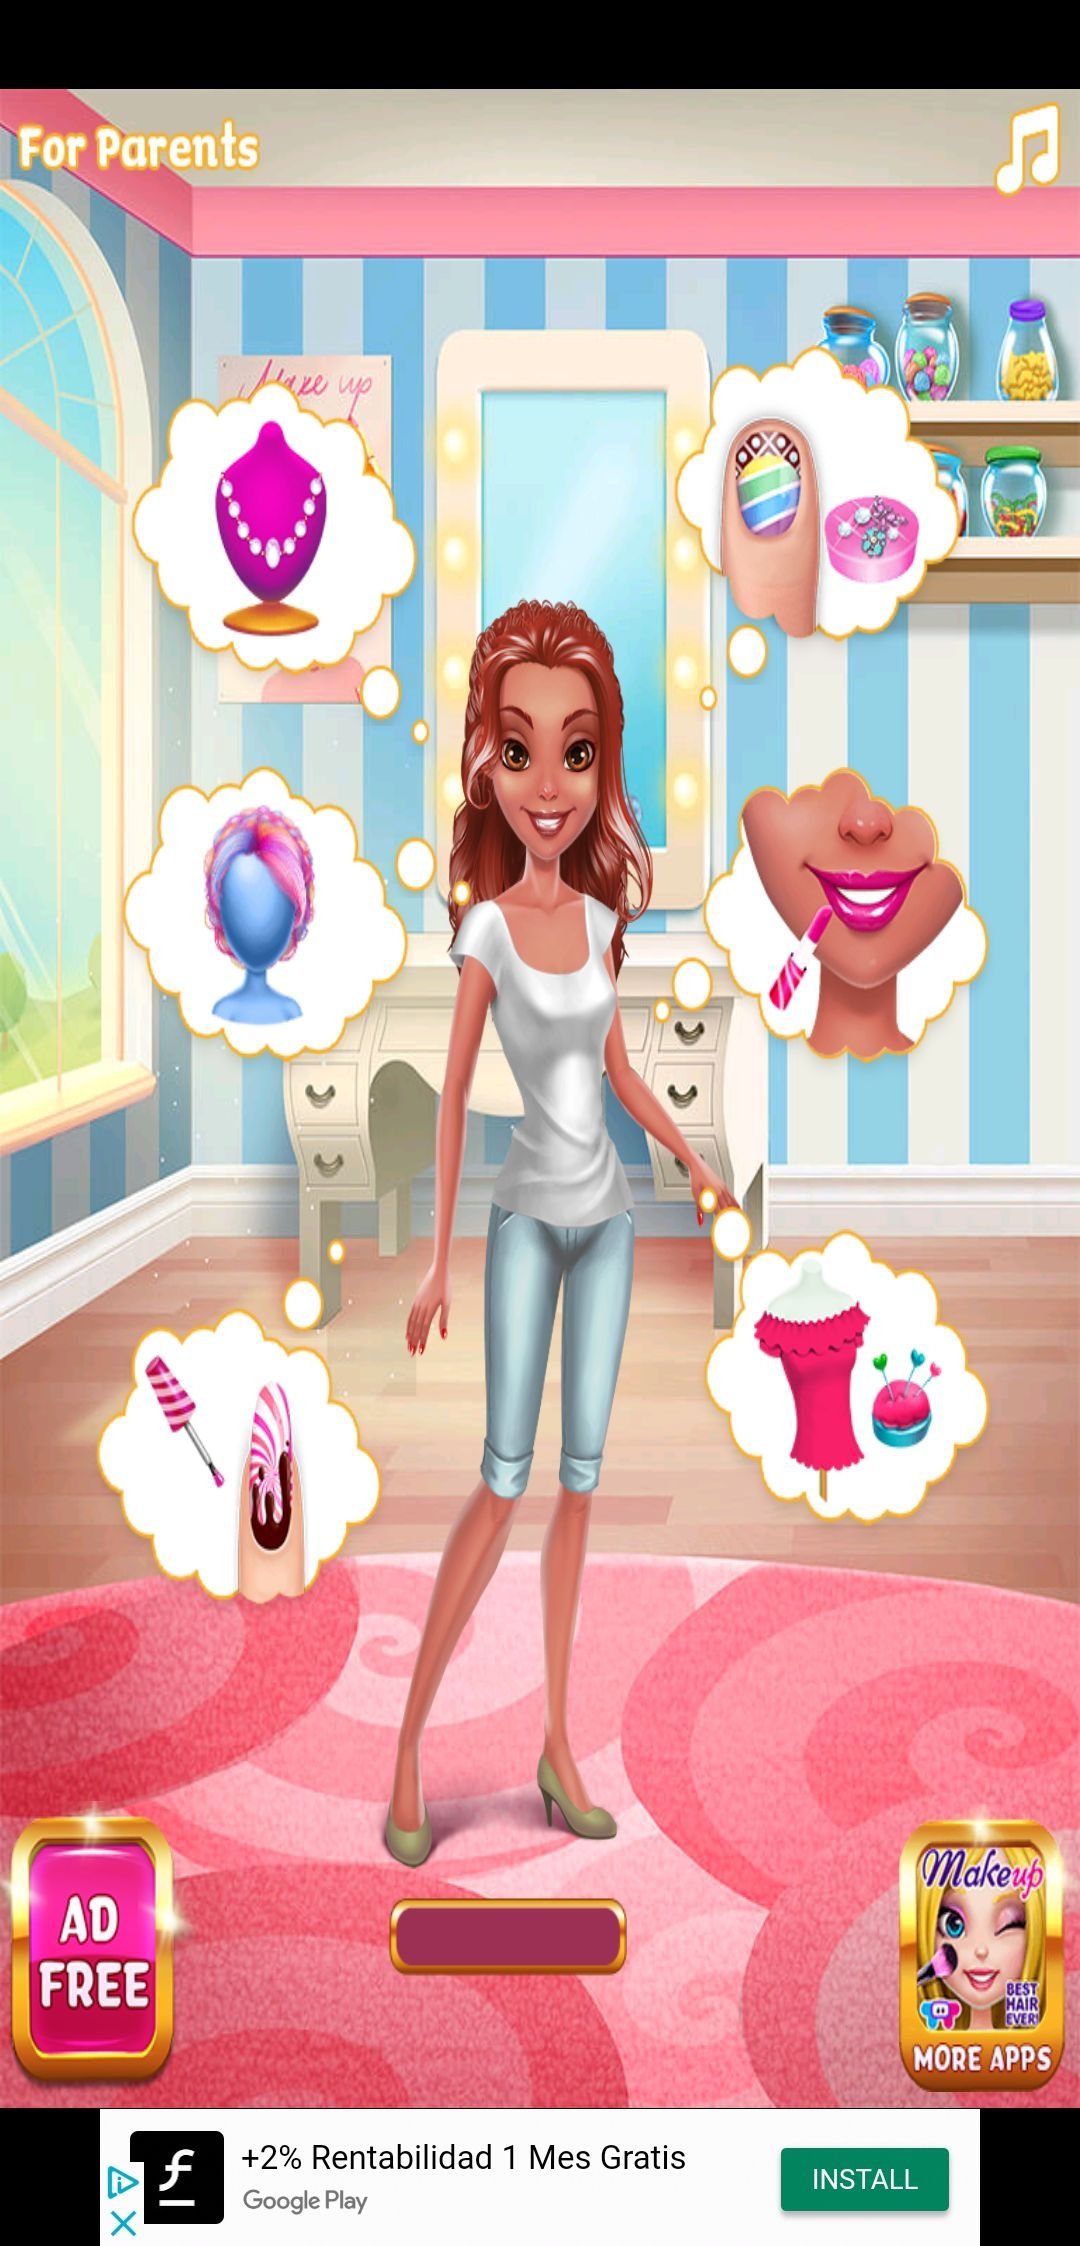 Makeup Beauty - Makeup Games for Android - Free App Download